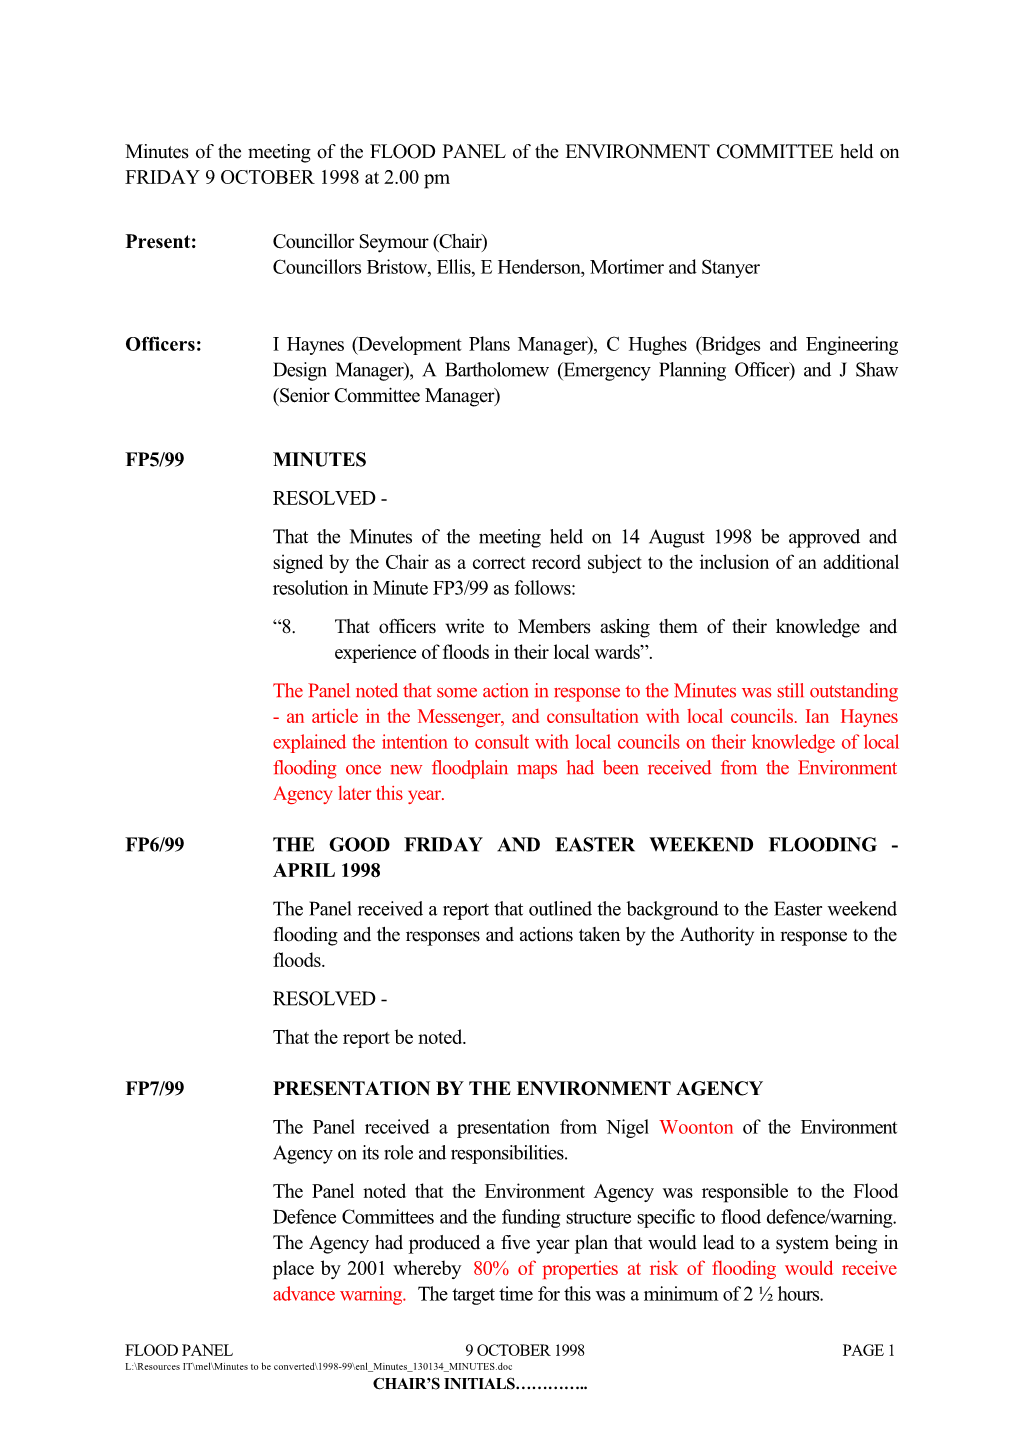 Minutes of the Meeting of the FLOOD PANEL of the ENVIRONMENT COMMITTEE Held on FRIDAY 9 OCTOBER 1998 at 2.00 Pm